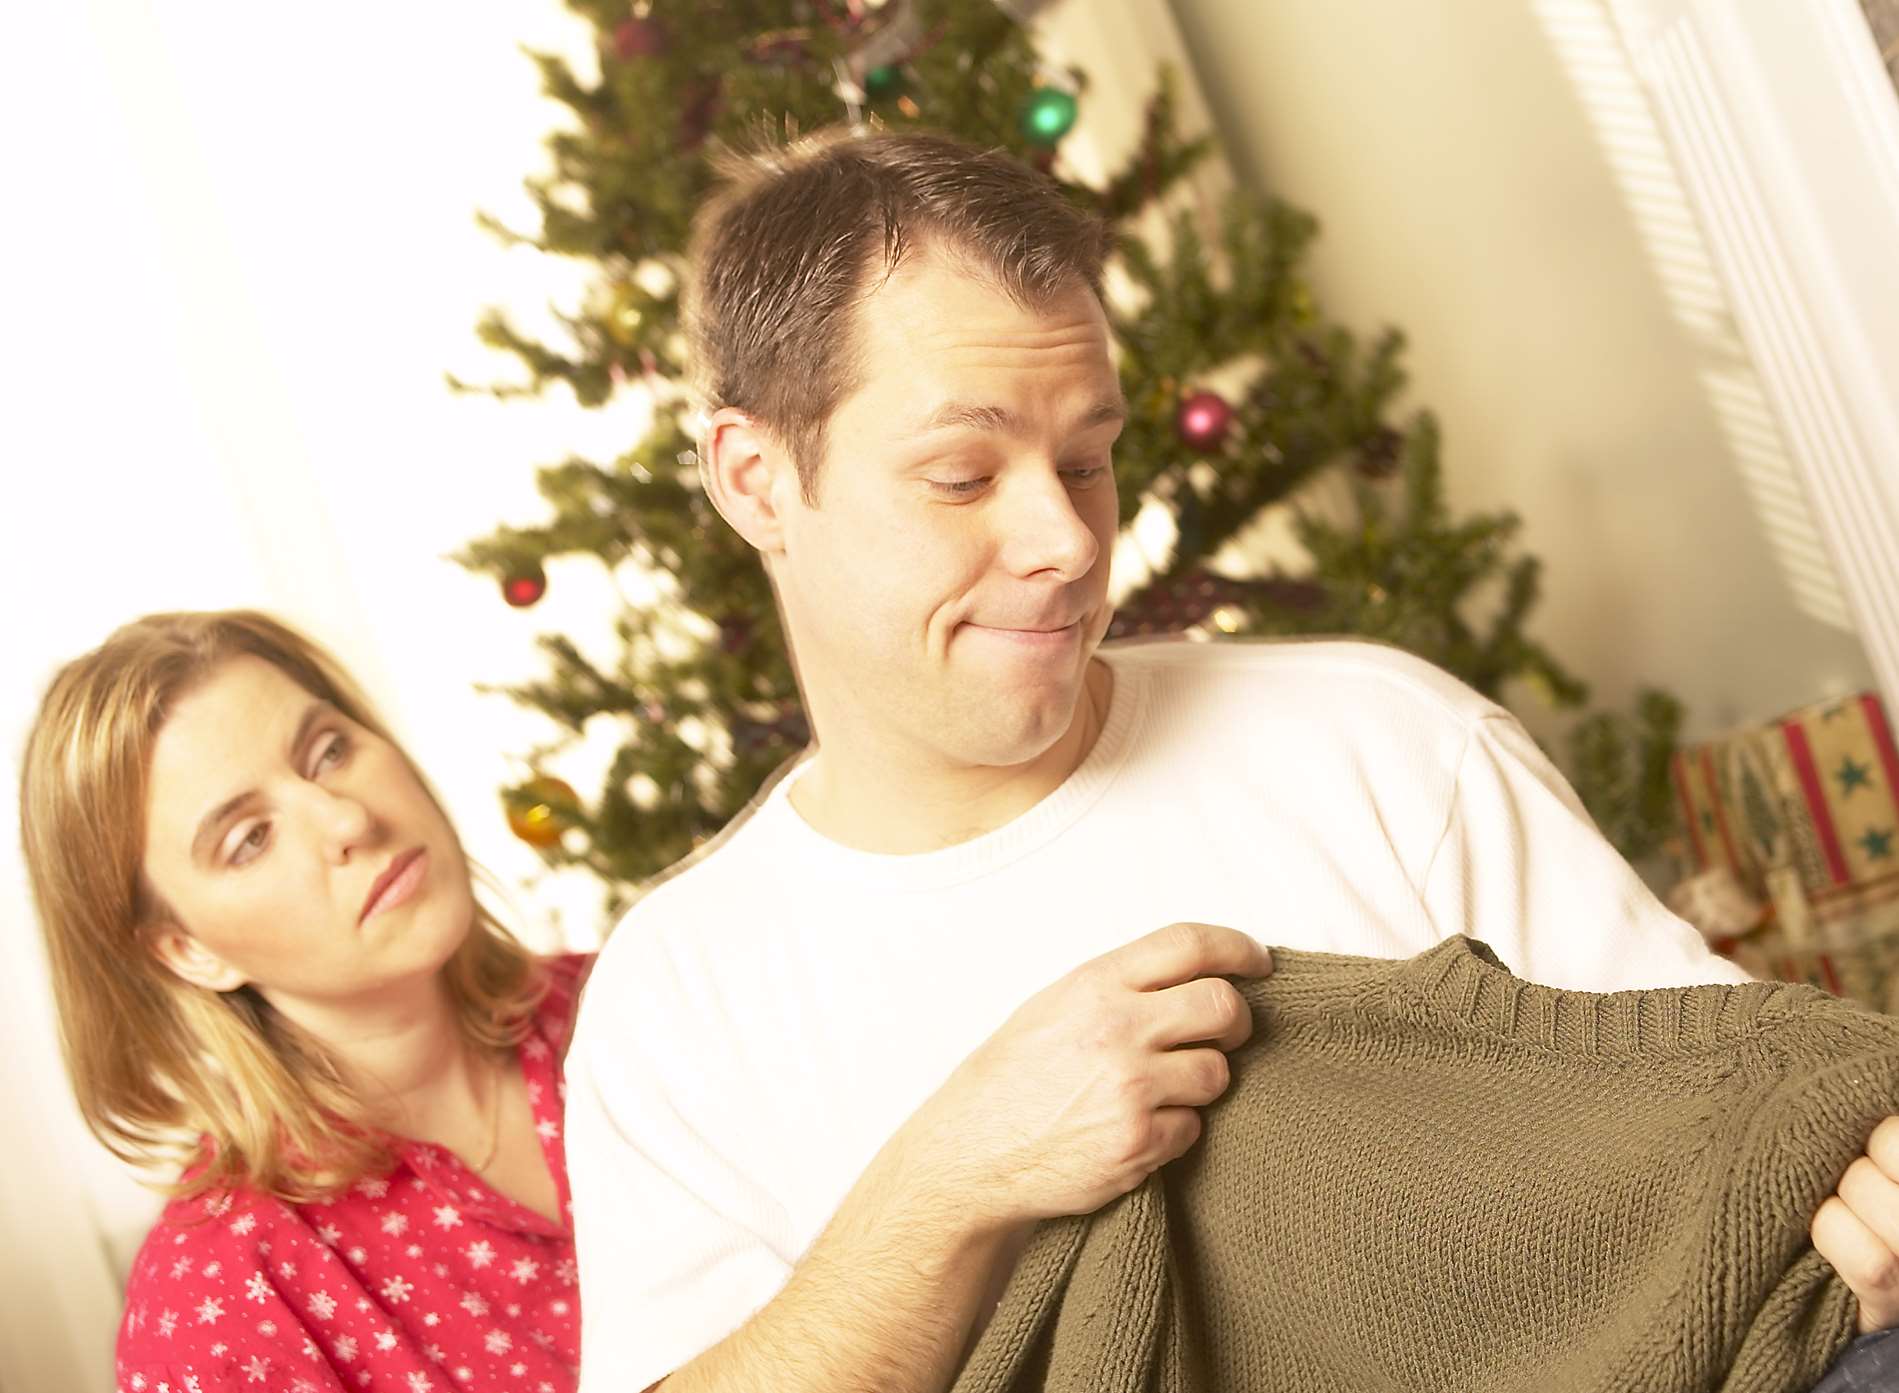 Will you be pretending to like your presents on Christmas Day?